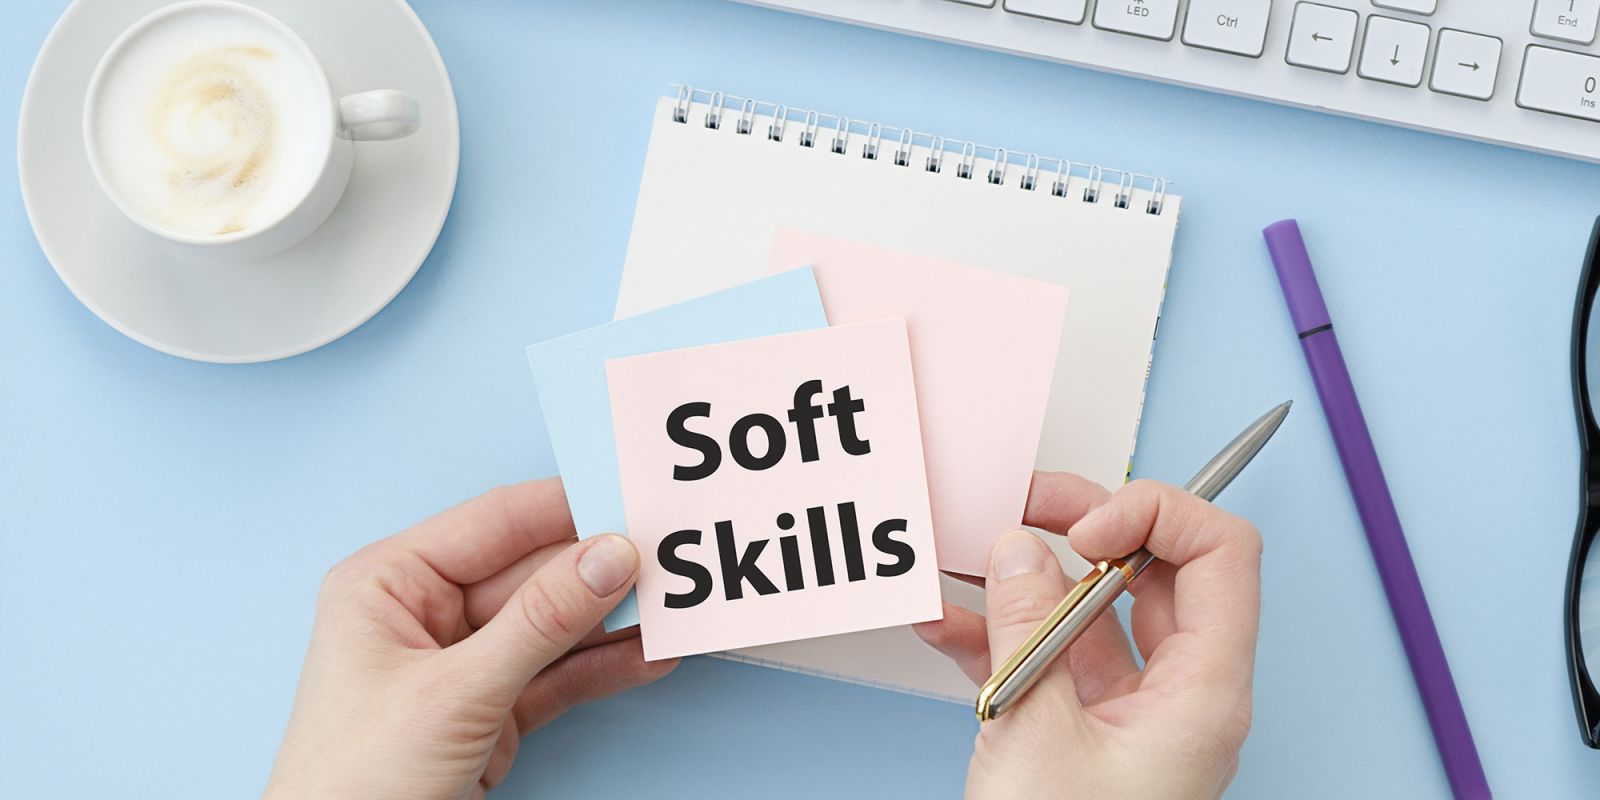 How Can Managers Improve Soft Skills?